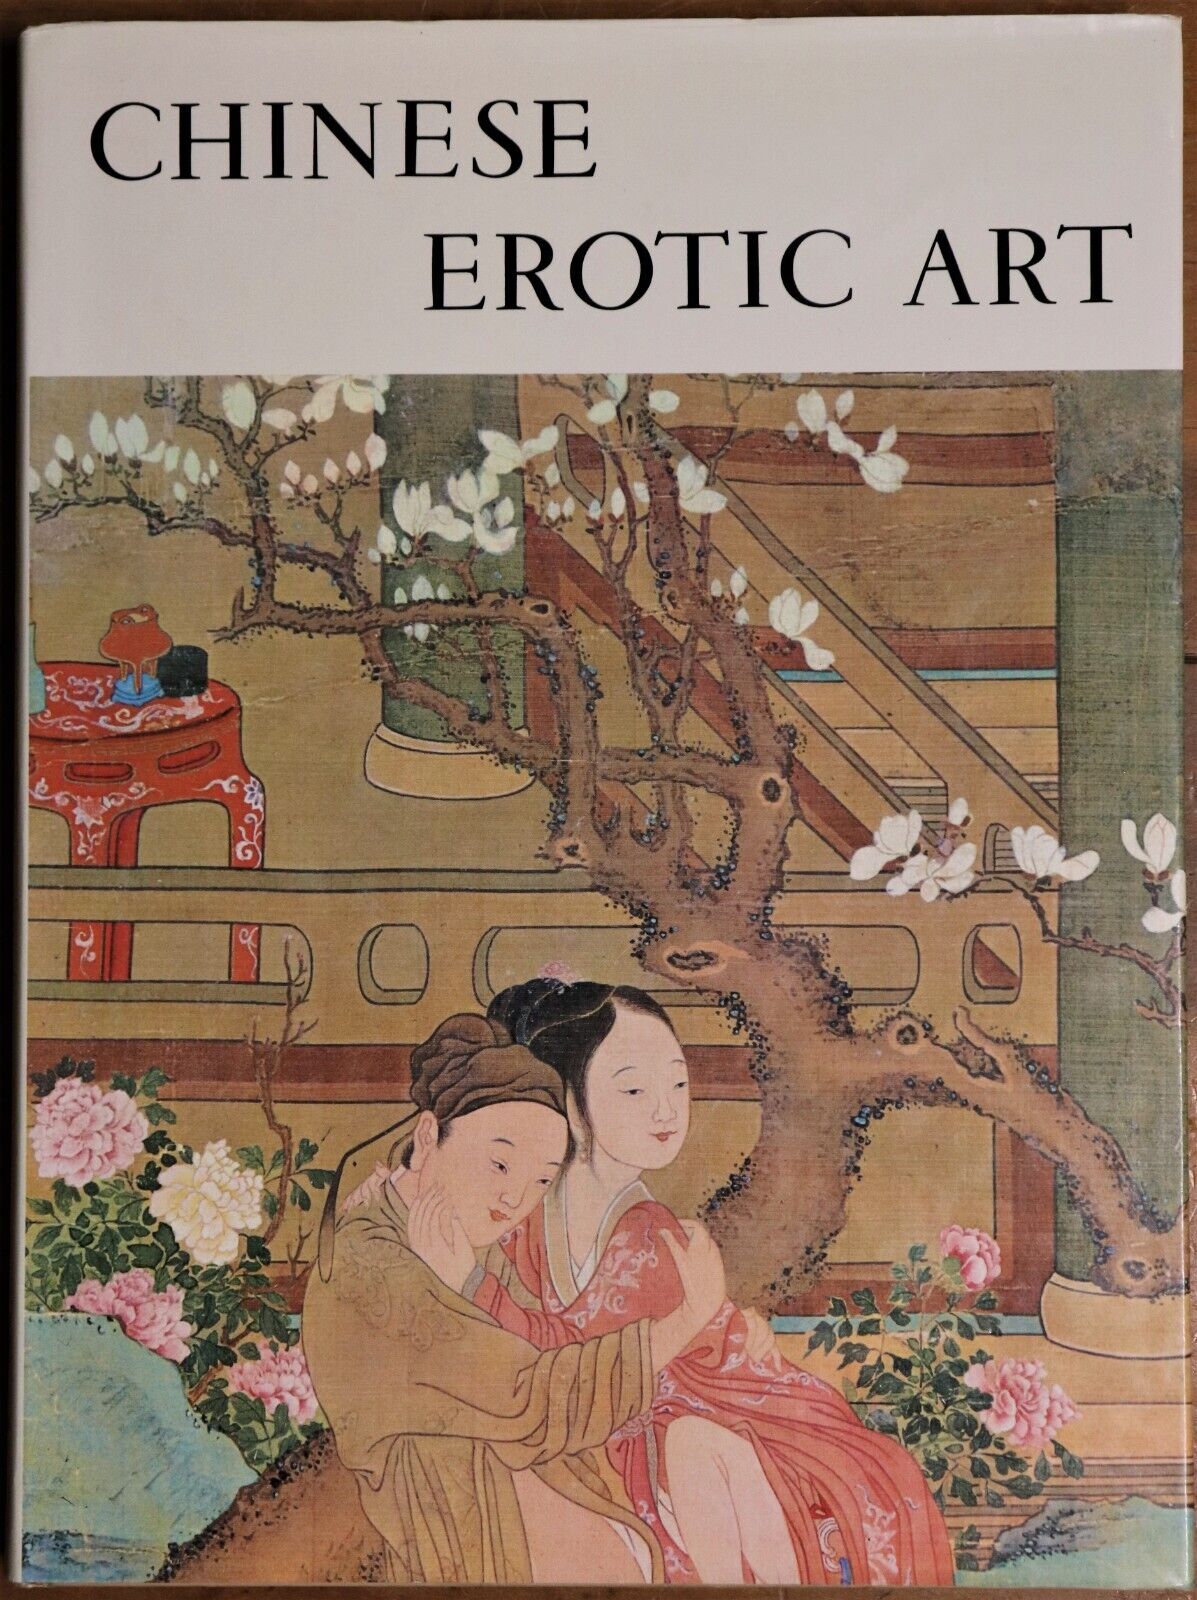 1969 Chinese Erotic Art by M Beurdeley 1st Edition Art Book